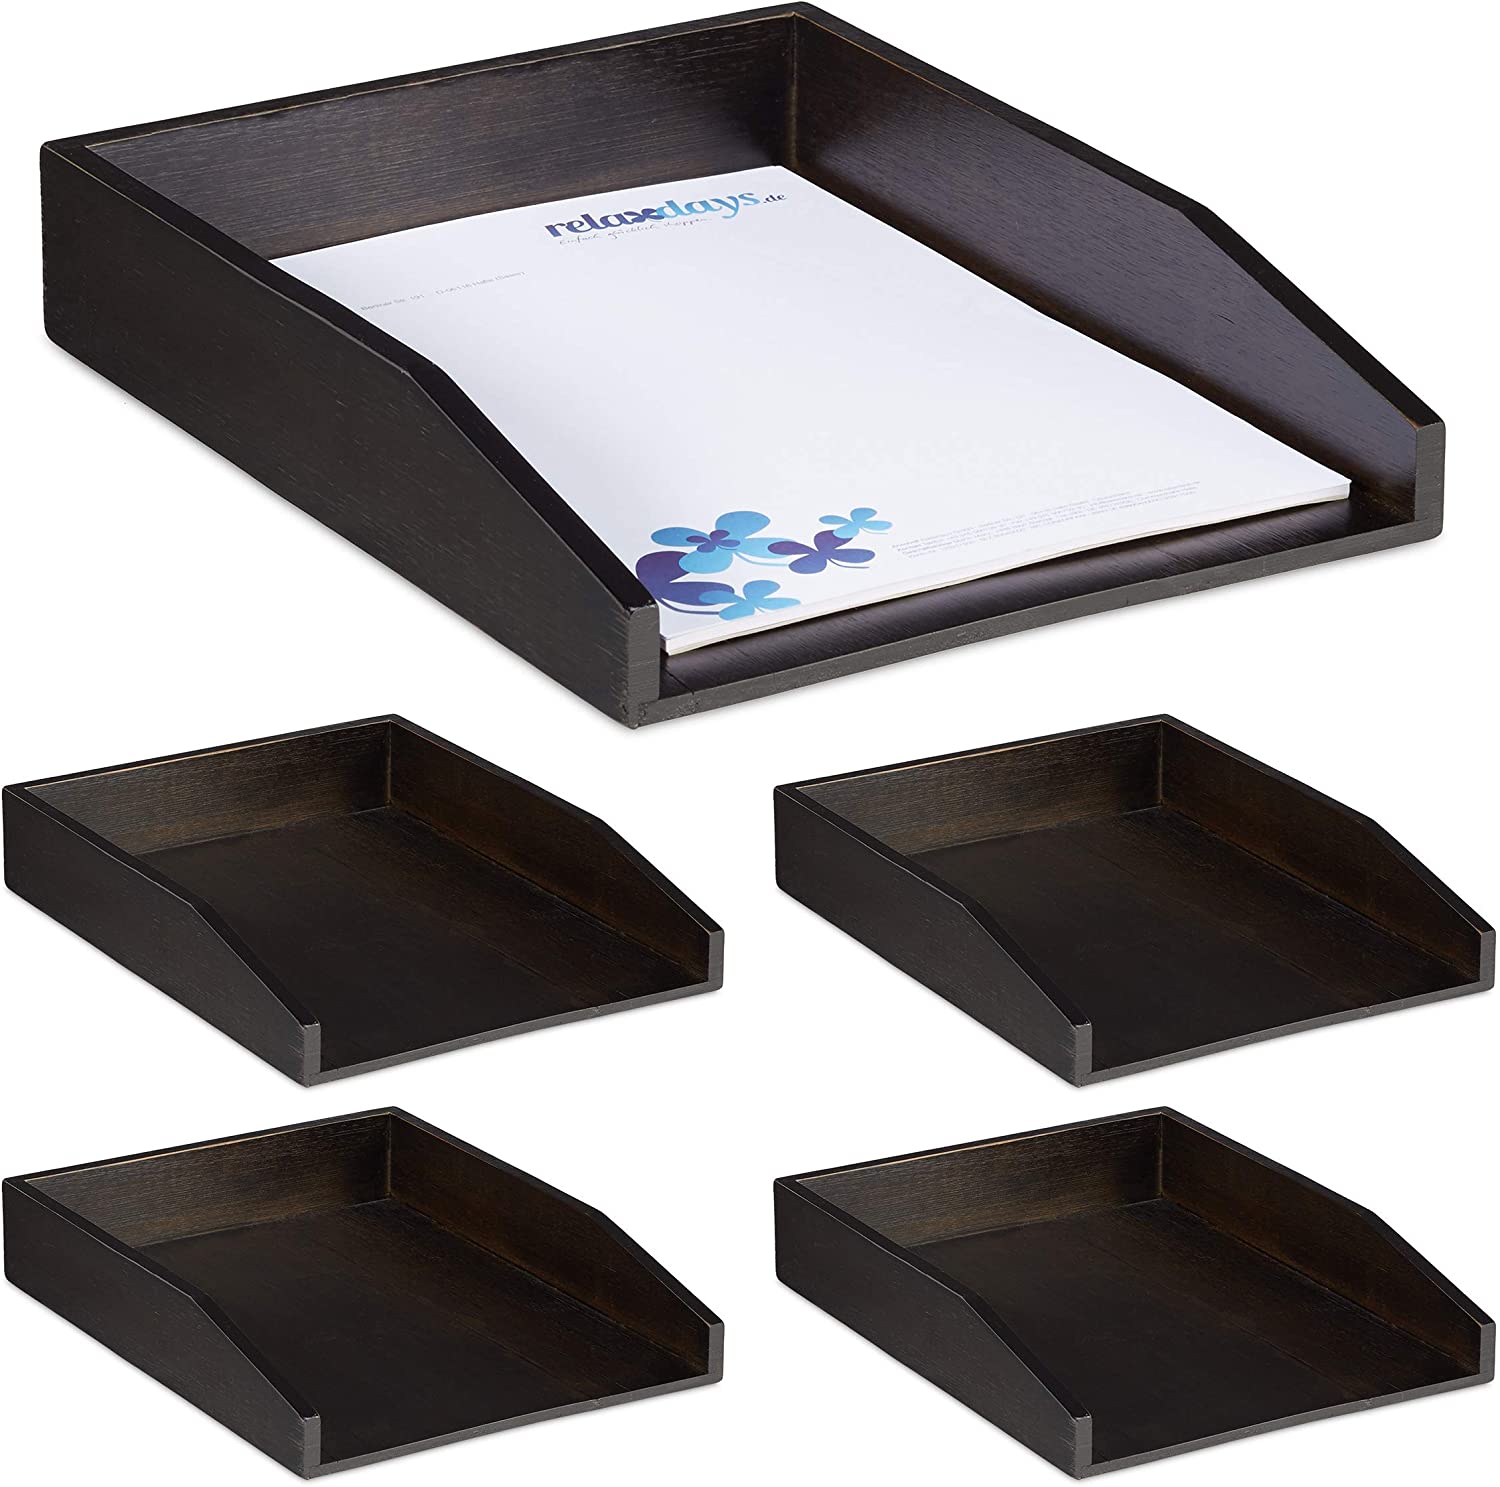 Relaxdays 5 X Document Trays Stackable Din A4 Paper Office Desk Letter Tray